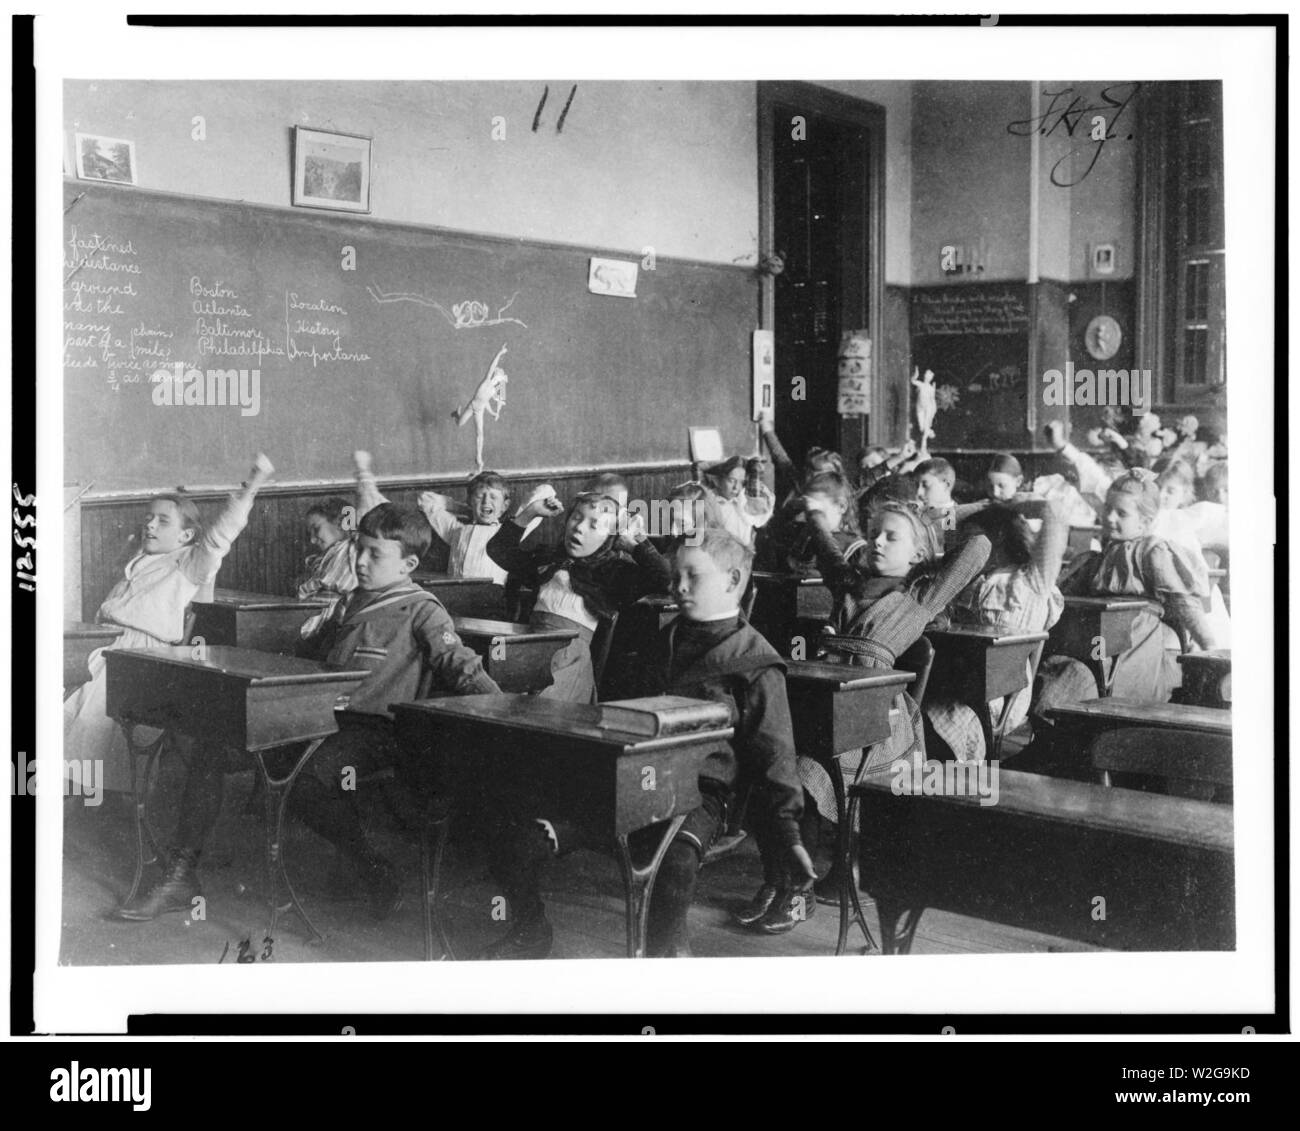 Children seated at desks in Washington, D.C. classroom, stretching Stock Photo